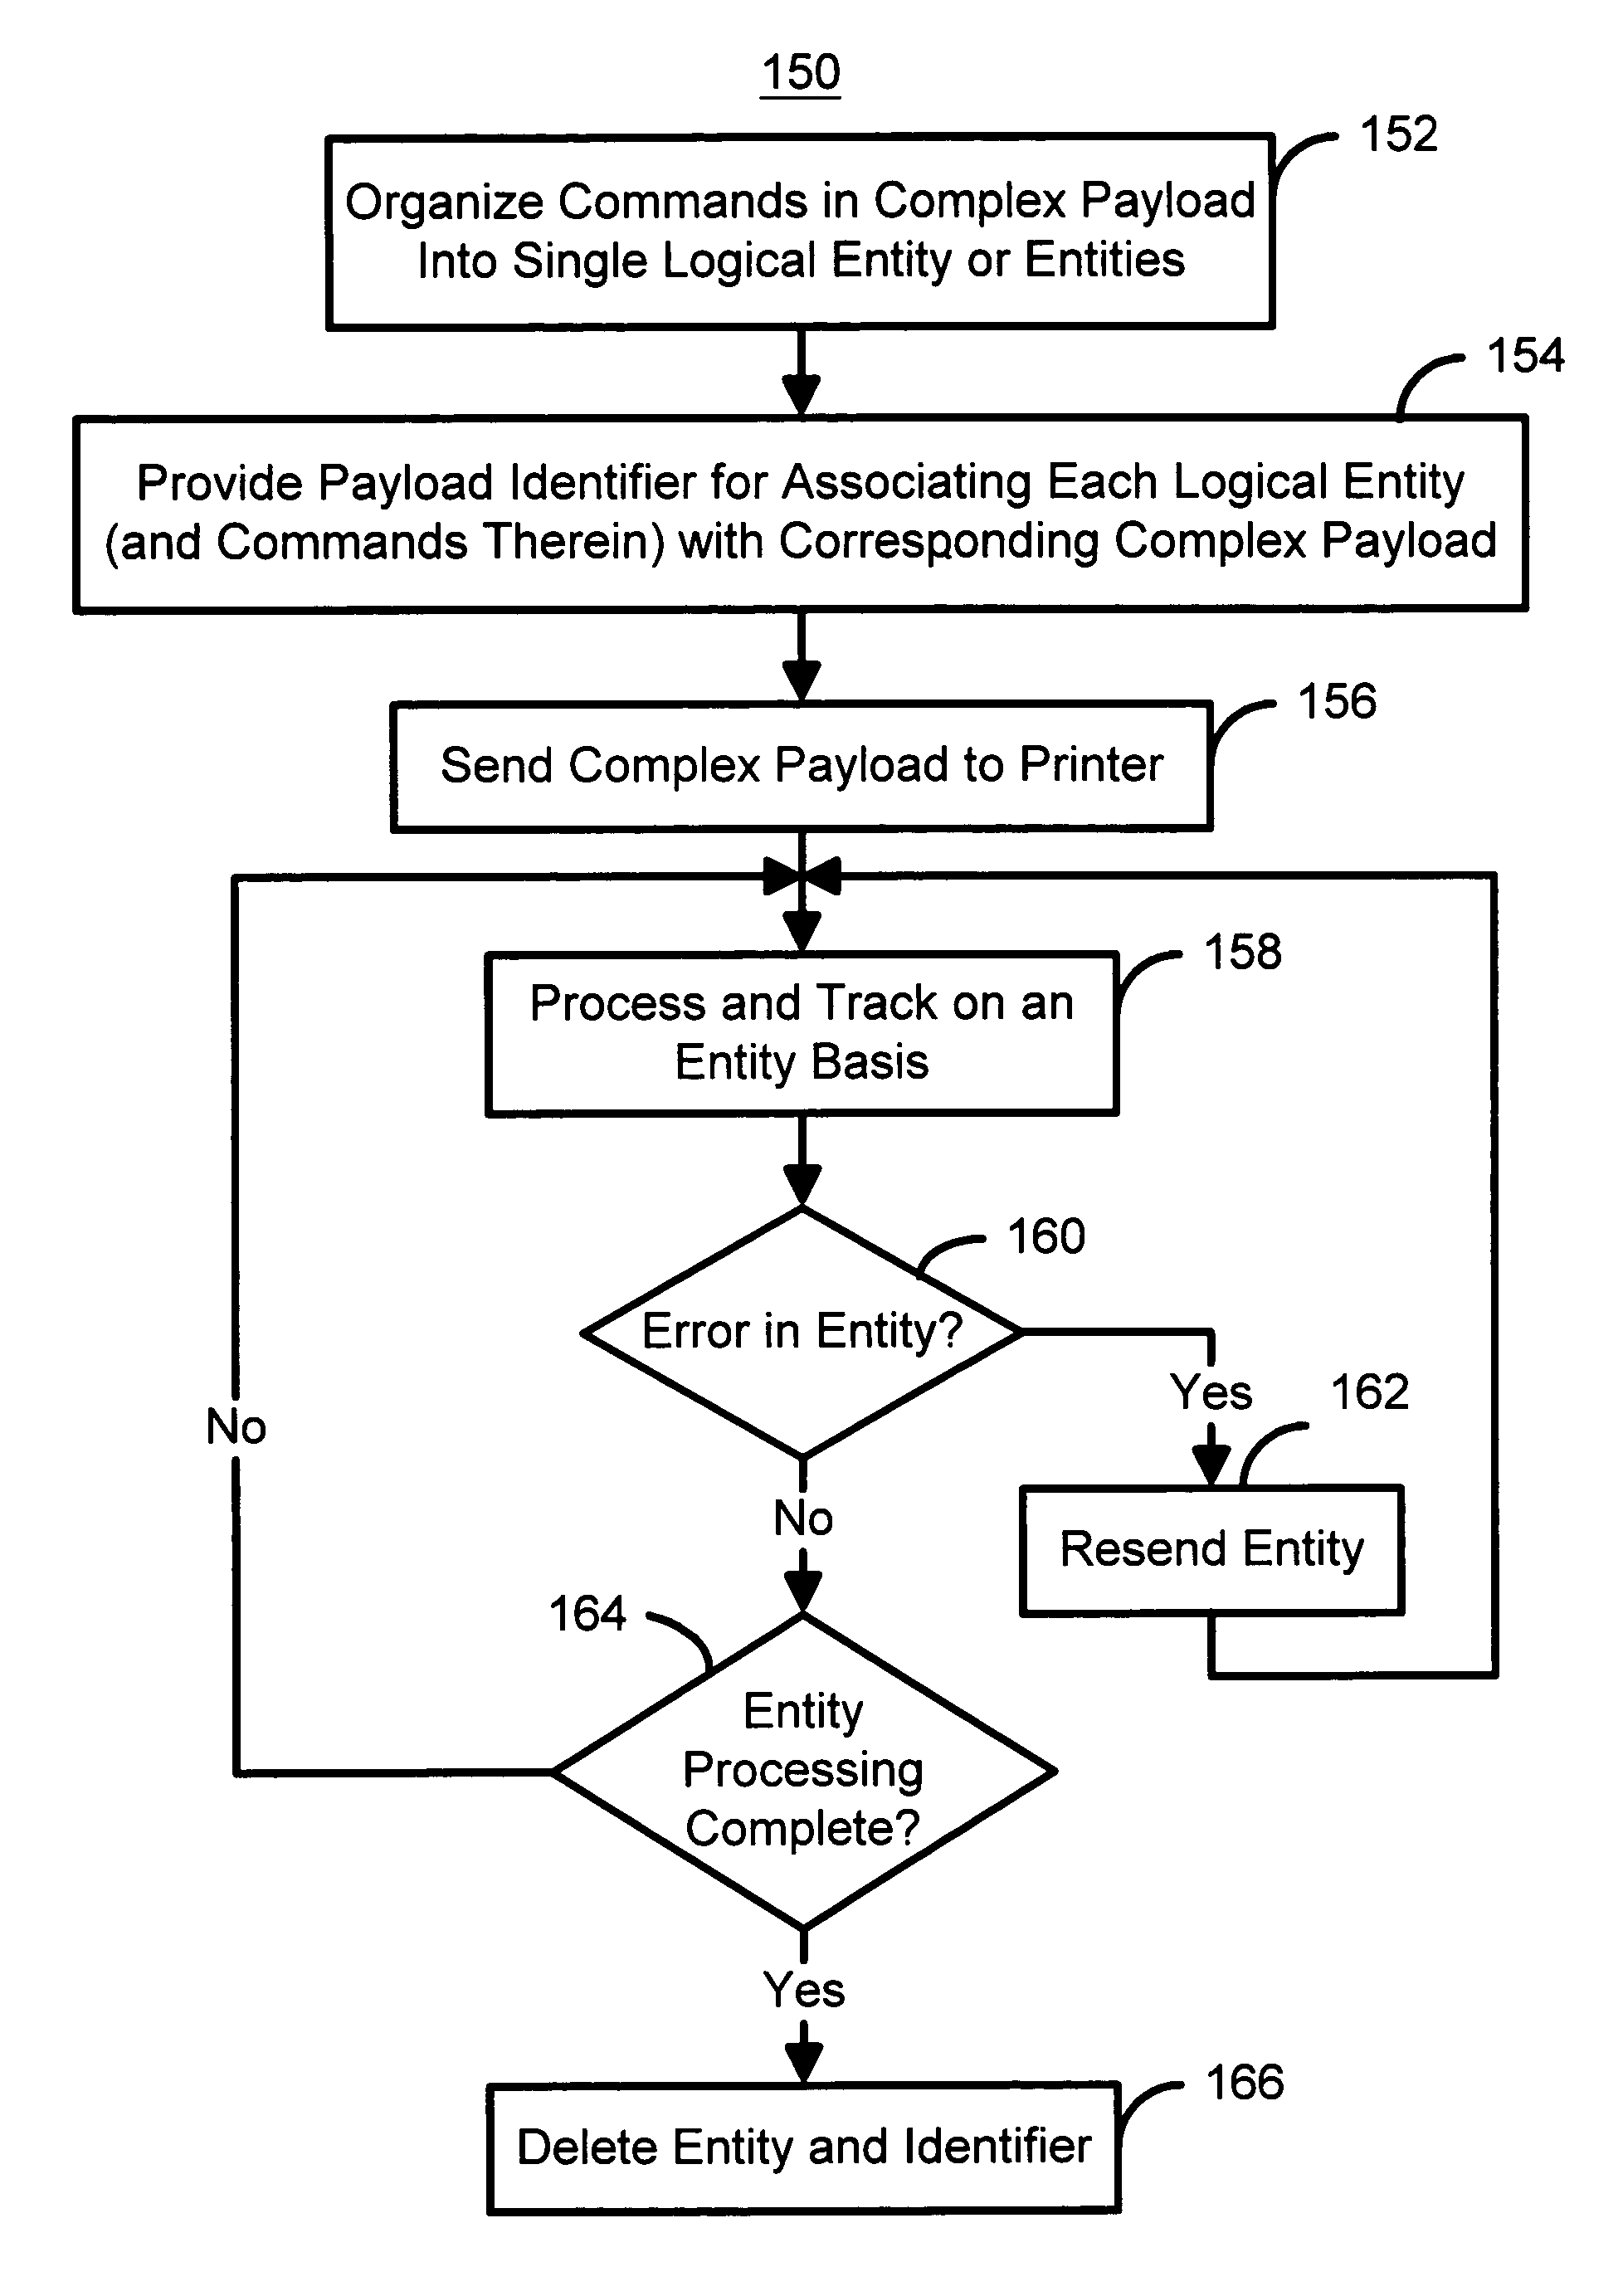 Method for more efficiently managing complex payloads in a point of sale system